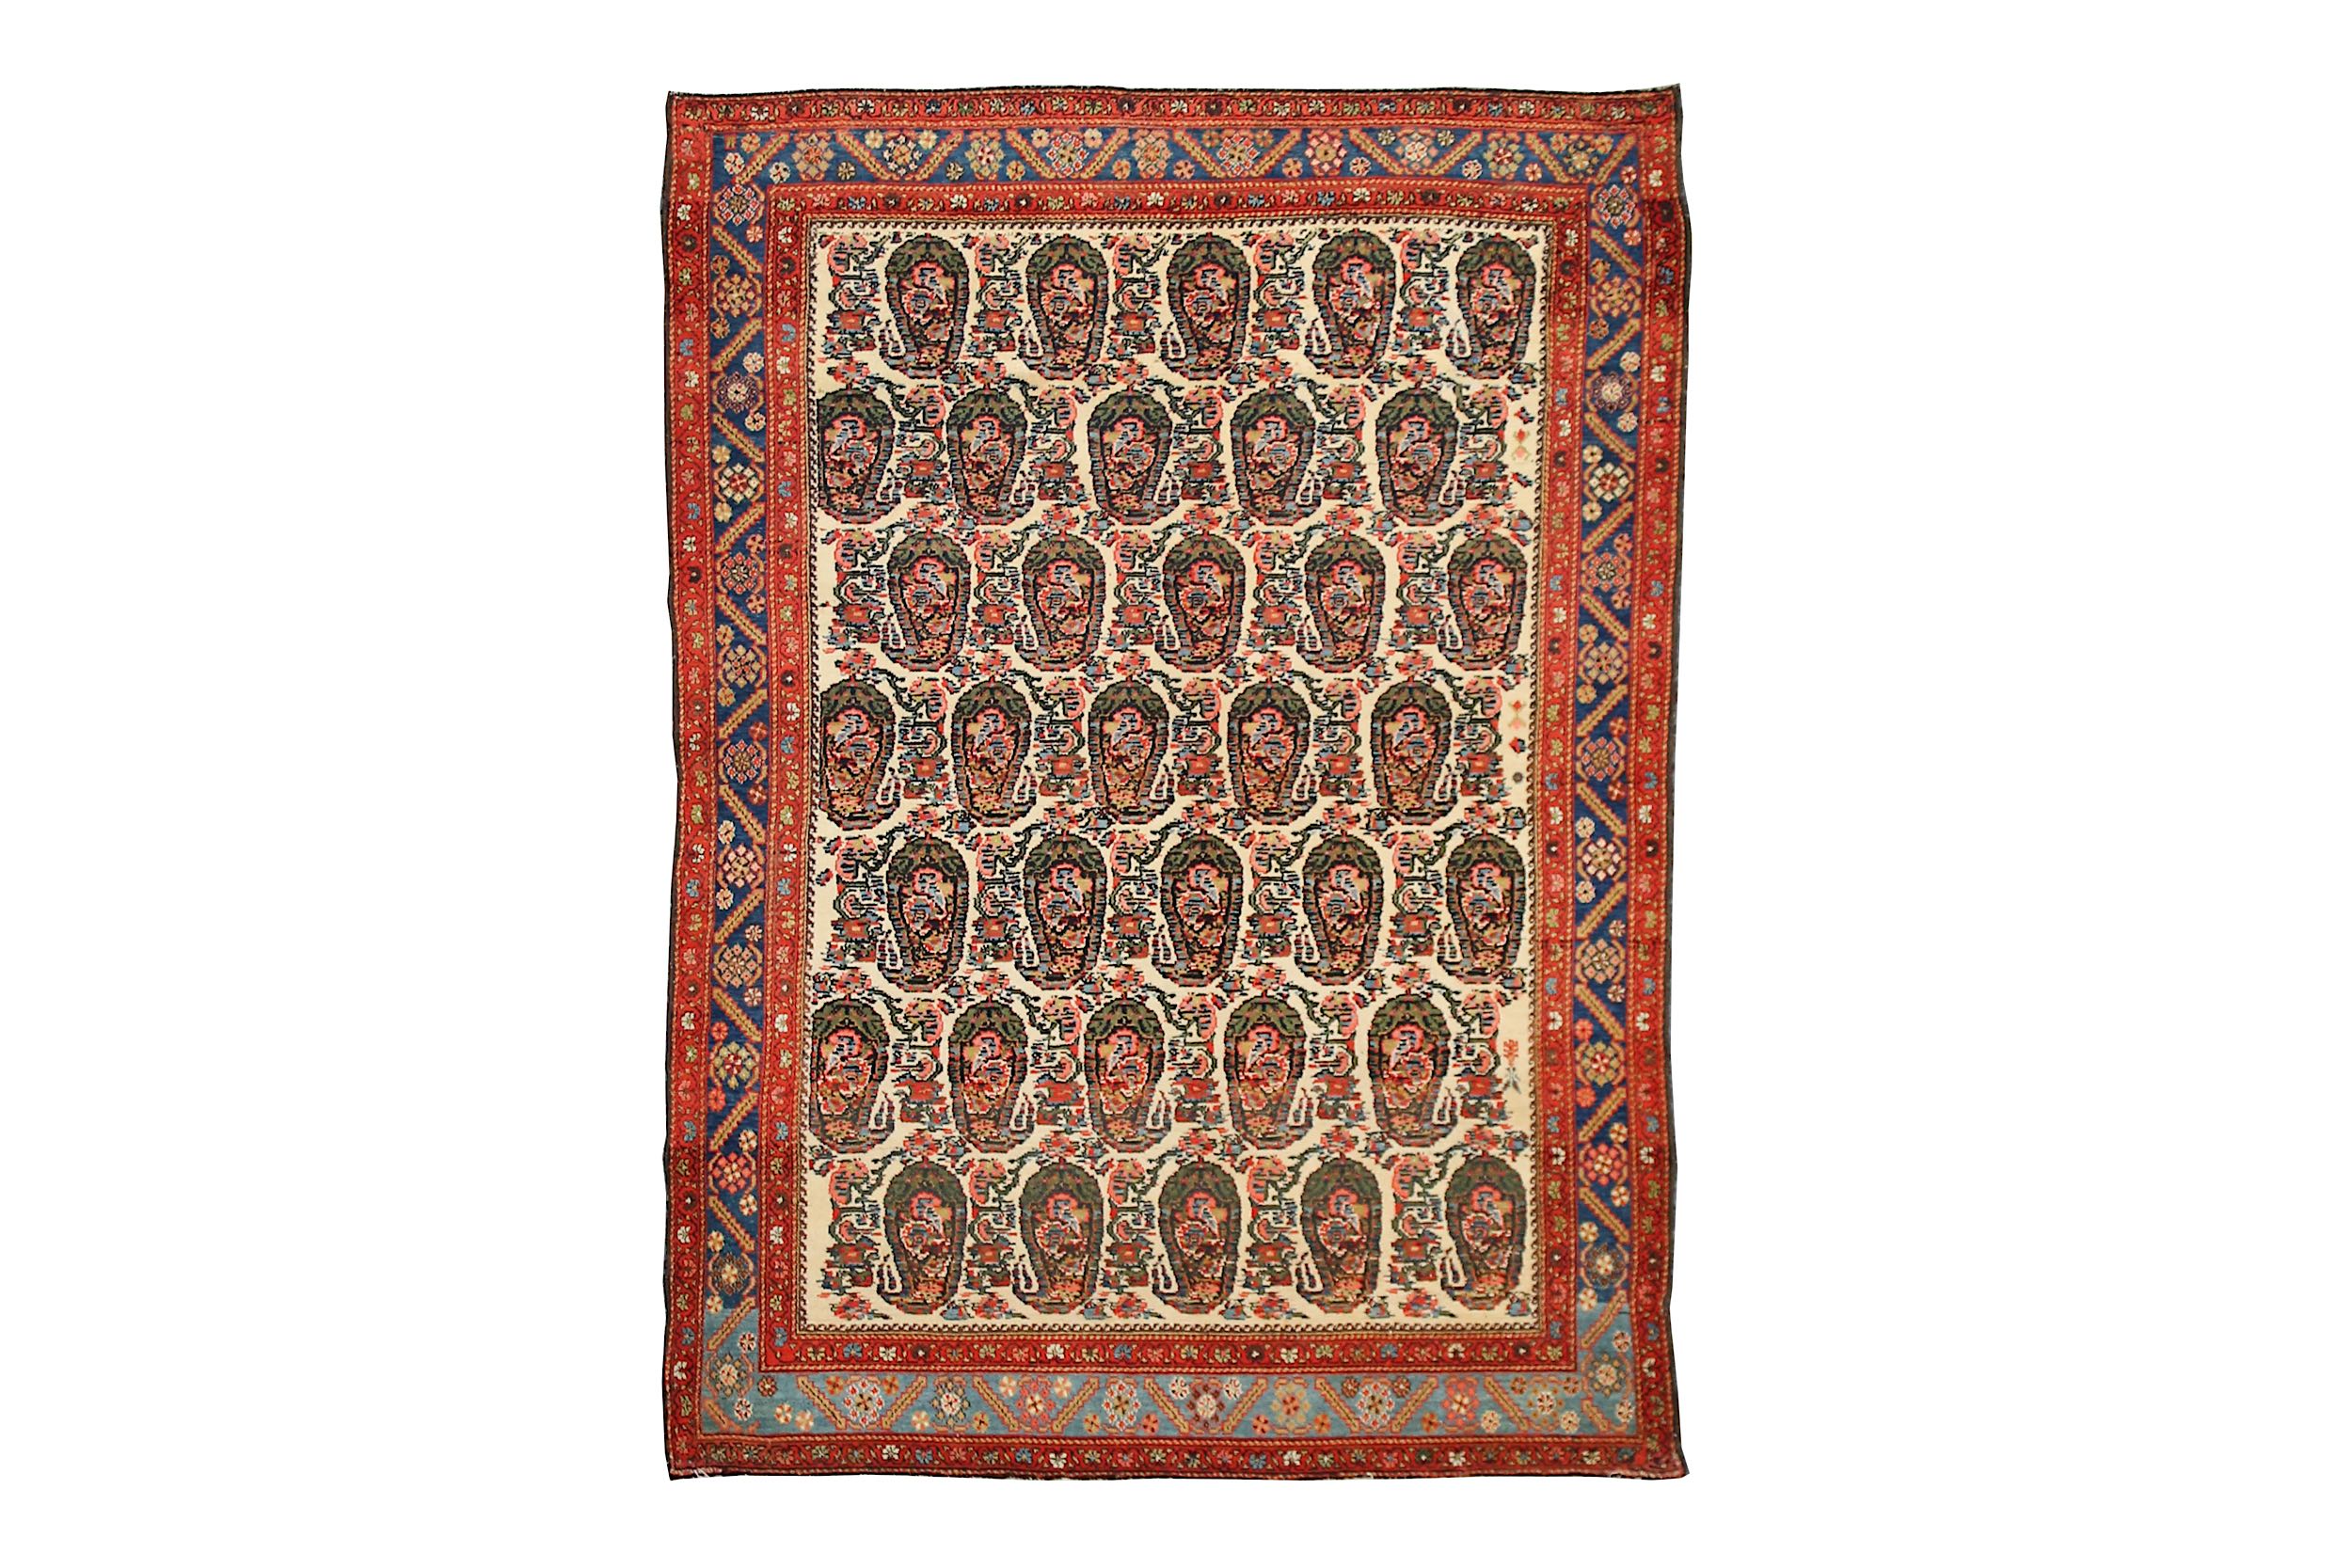 A FINE MALAYIR RUG, WEST PERSIA approx: 6ft.1in. x 4ft.4in.(185cm. x 132cm.) the ivory field with